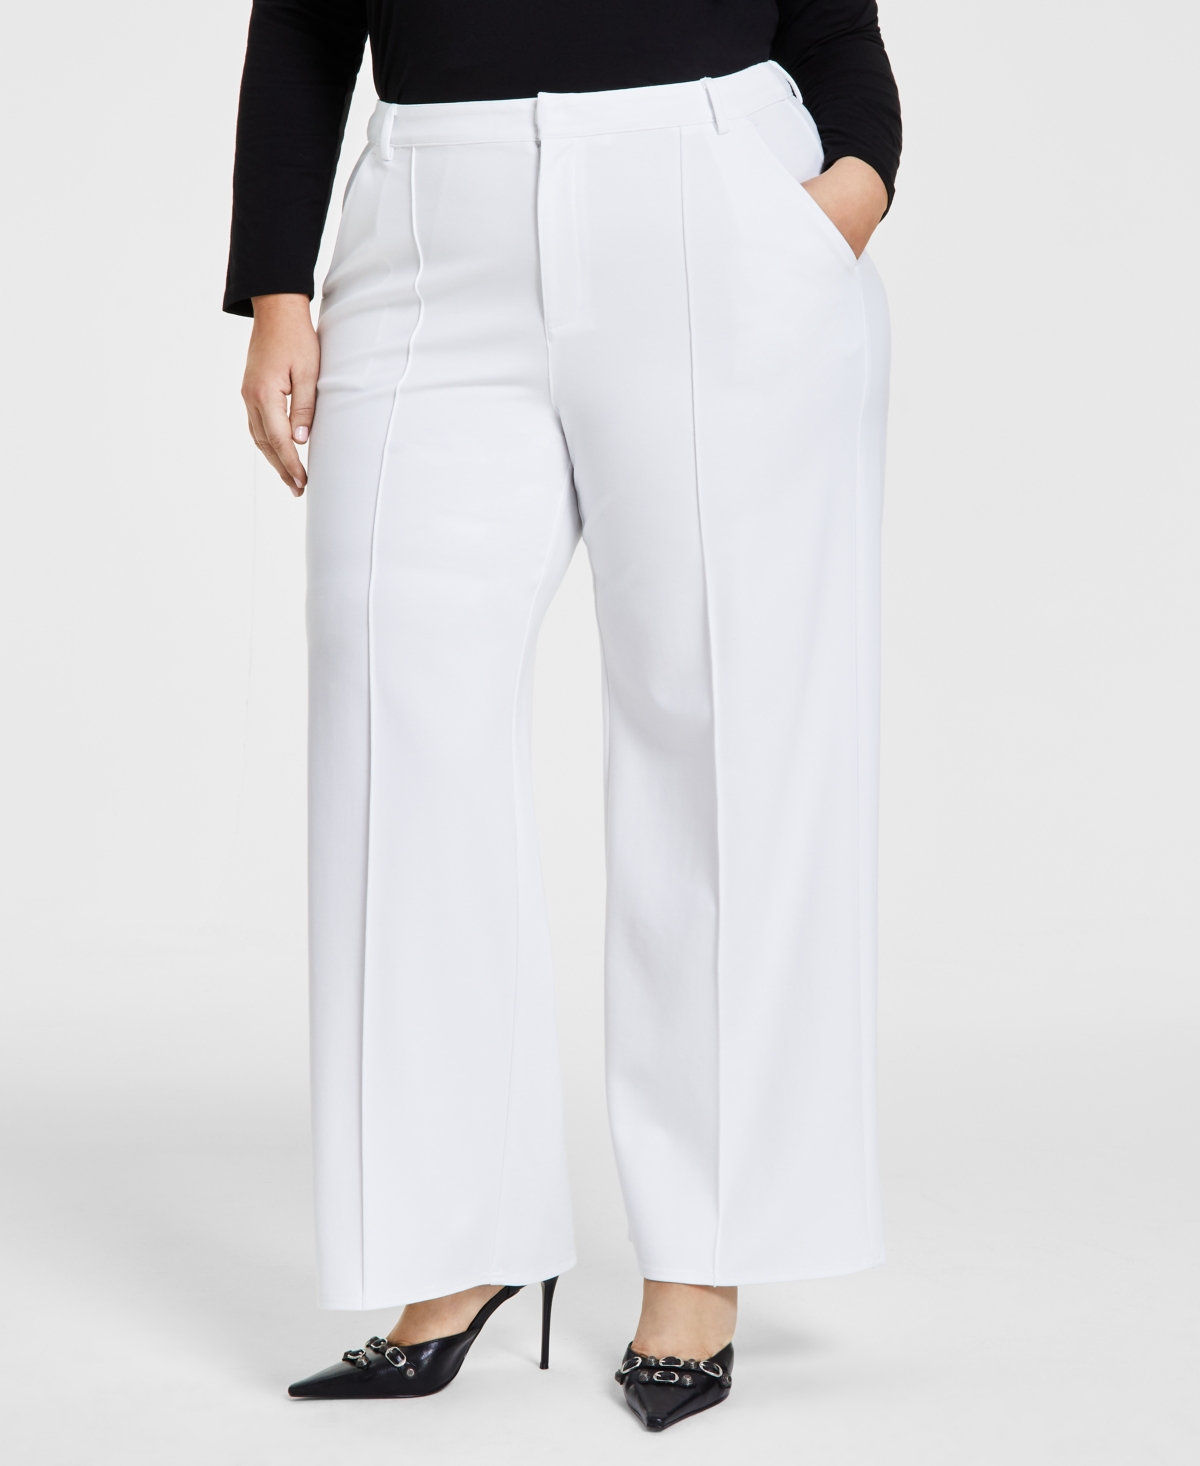 Trendy Plus Size High-Rise Wide-Leg Ponte-Knit Pants, Created for Macy's - Deep Black